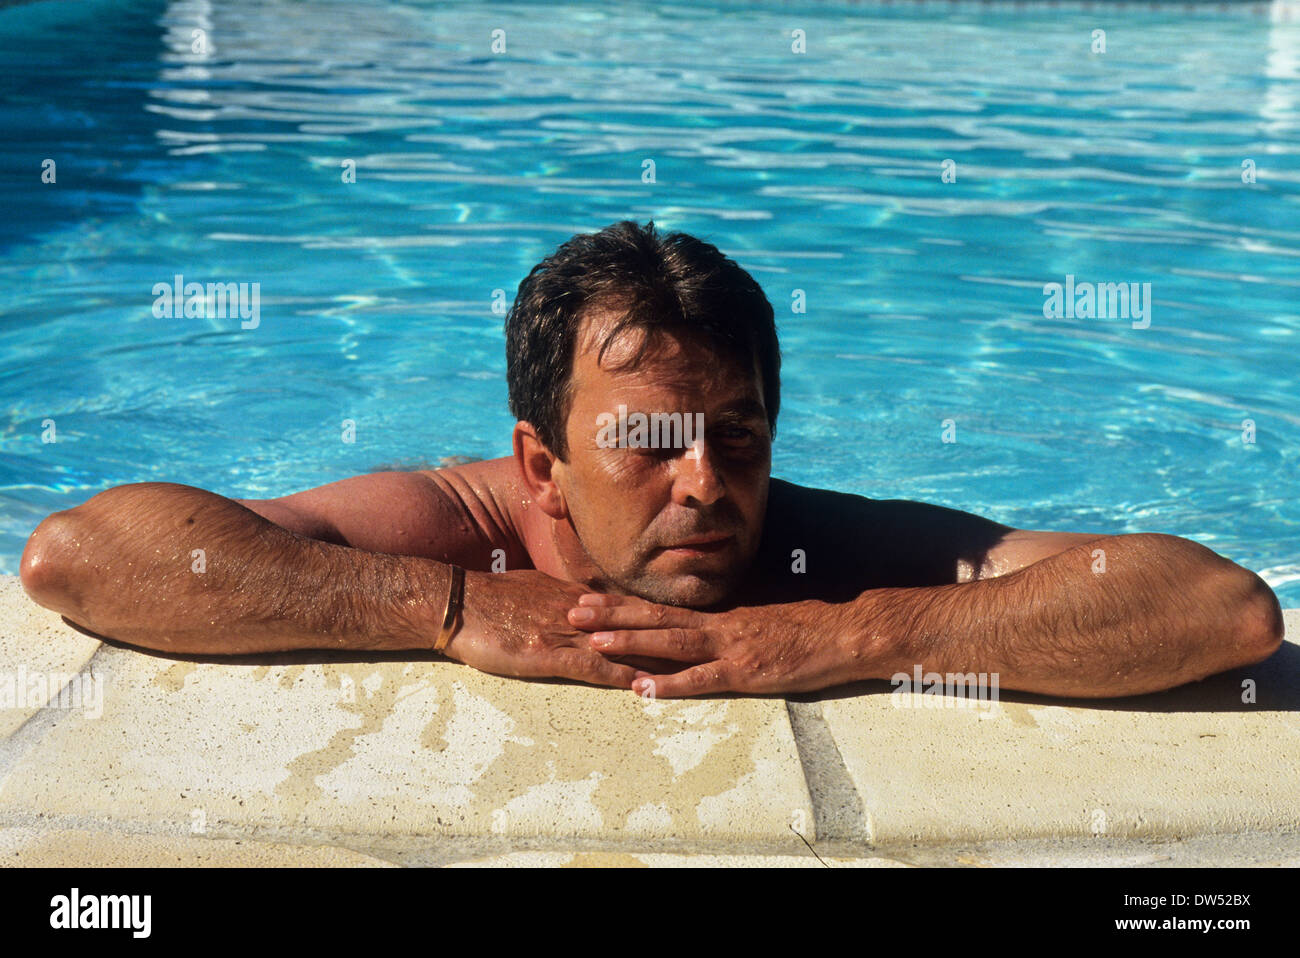 Man relaxing in holiday swimming pool Stock Photo